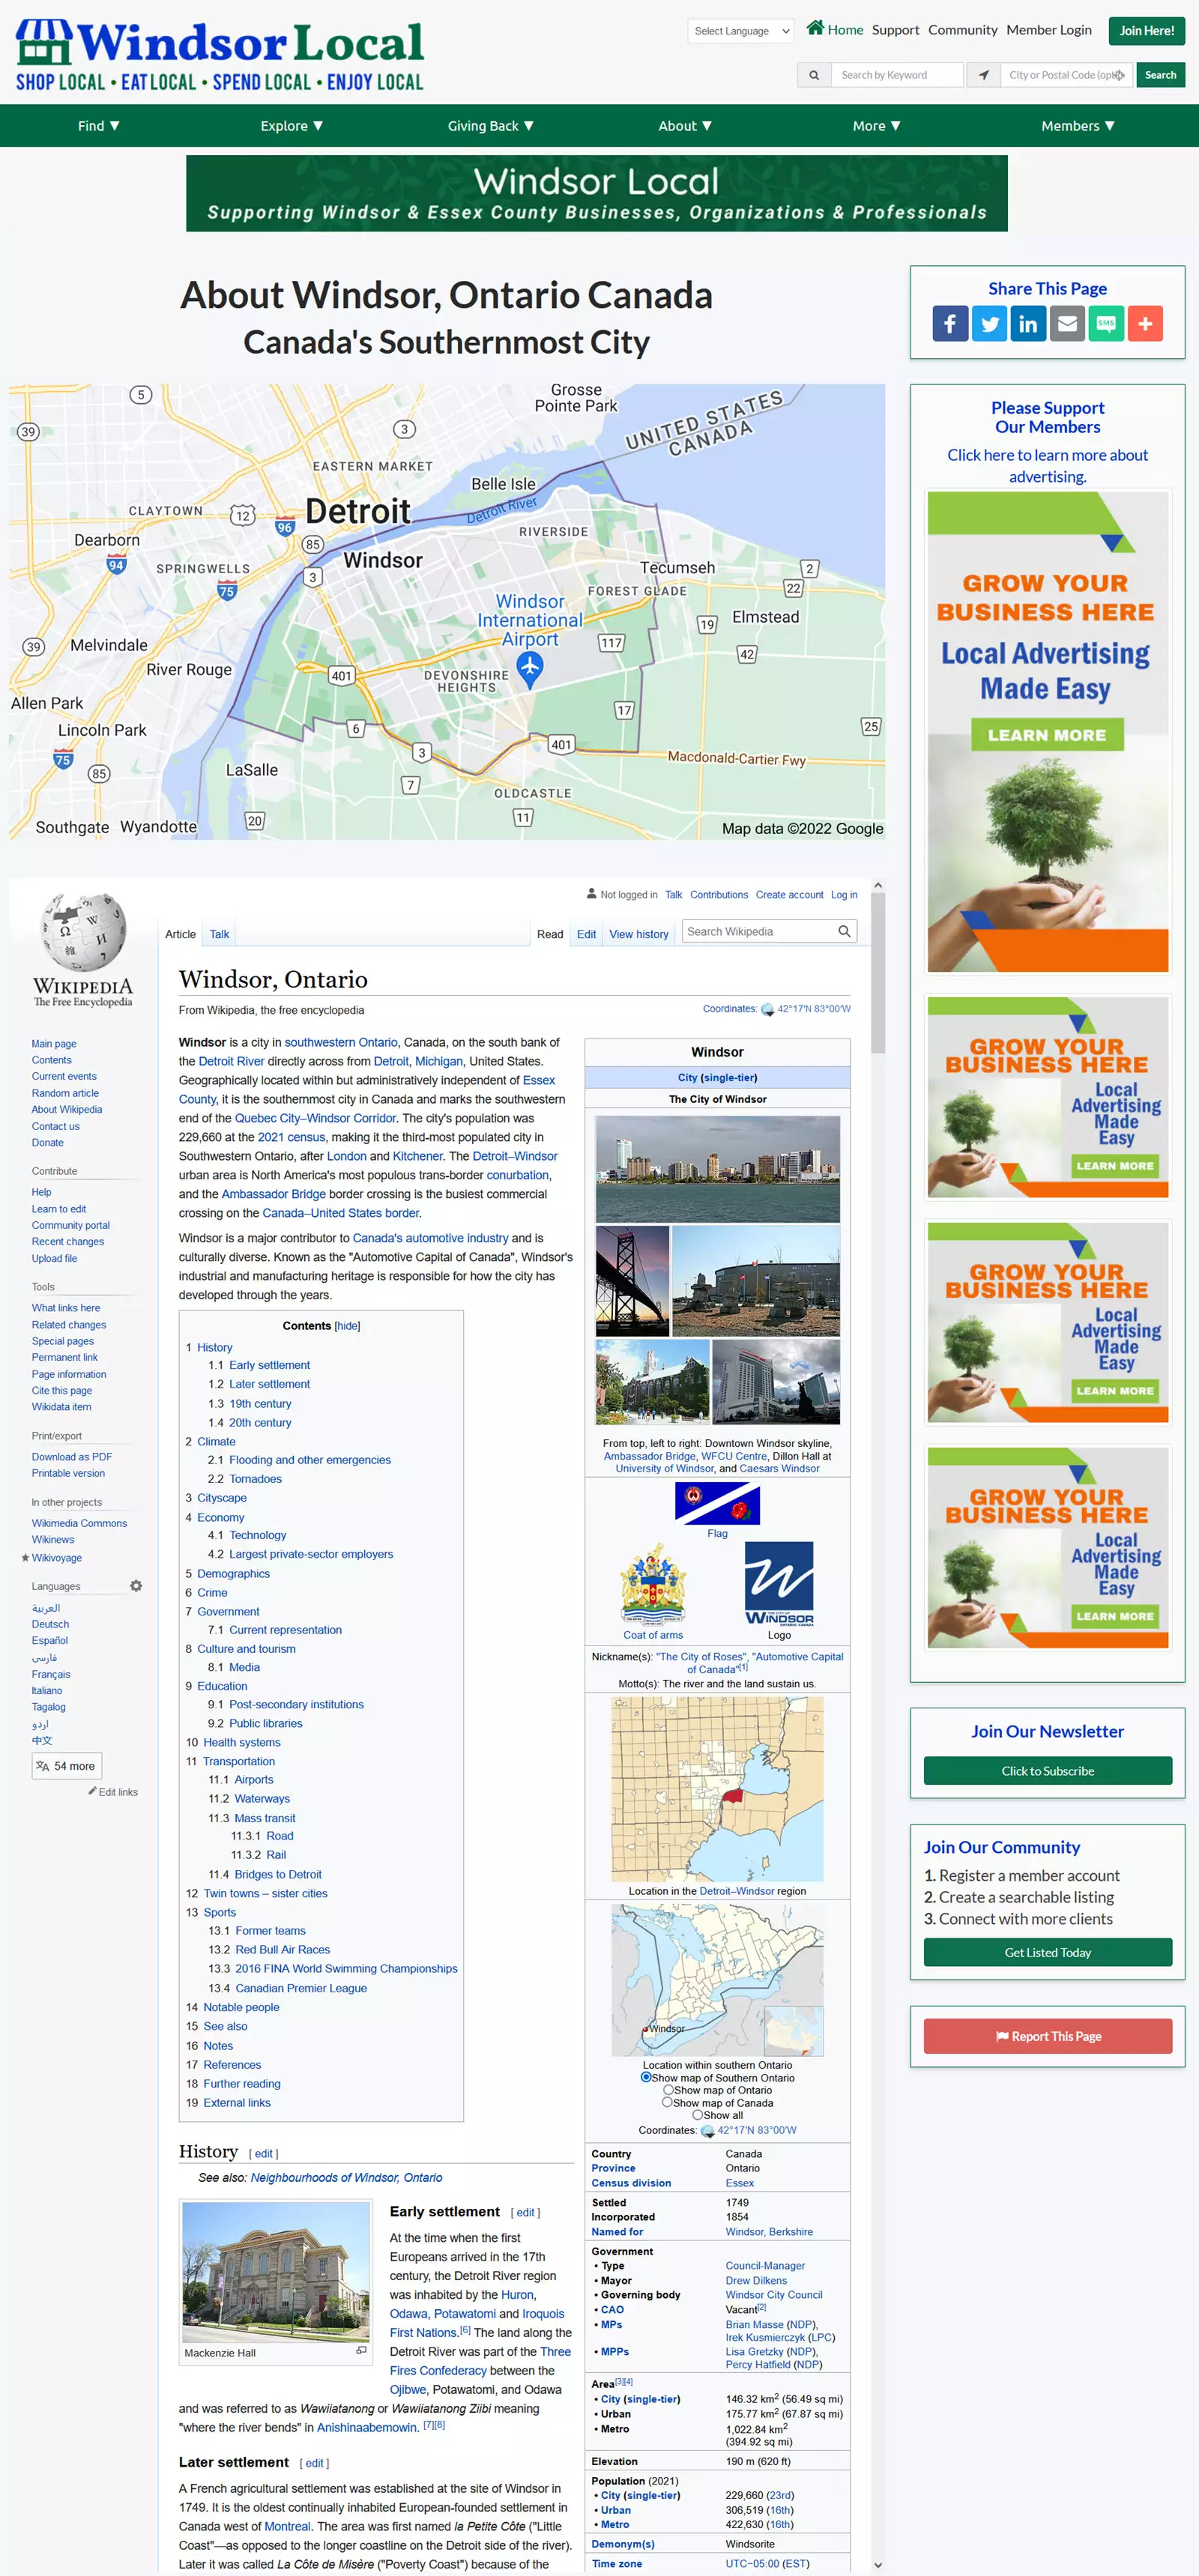 Windsor Local About - Windsor, Ontario Information view